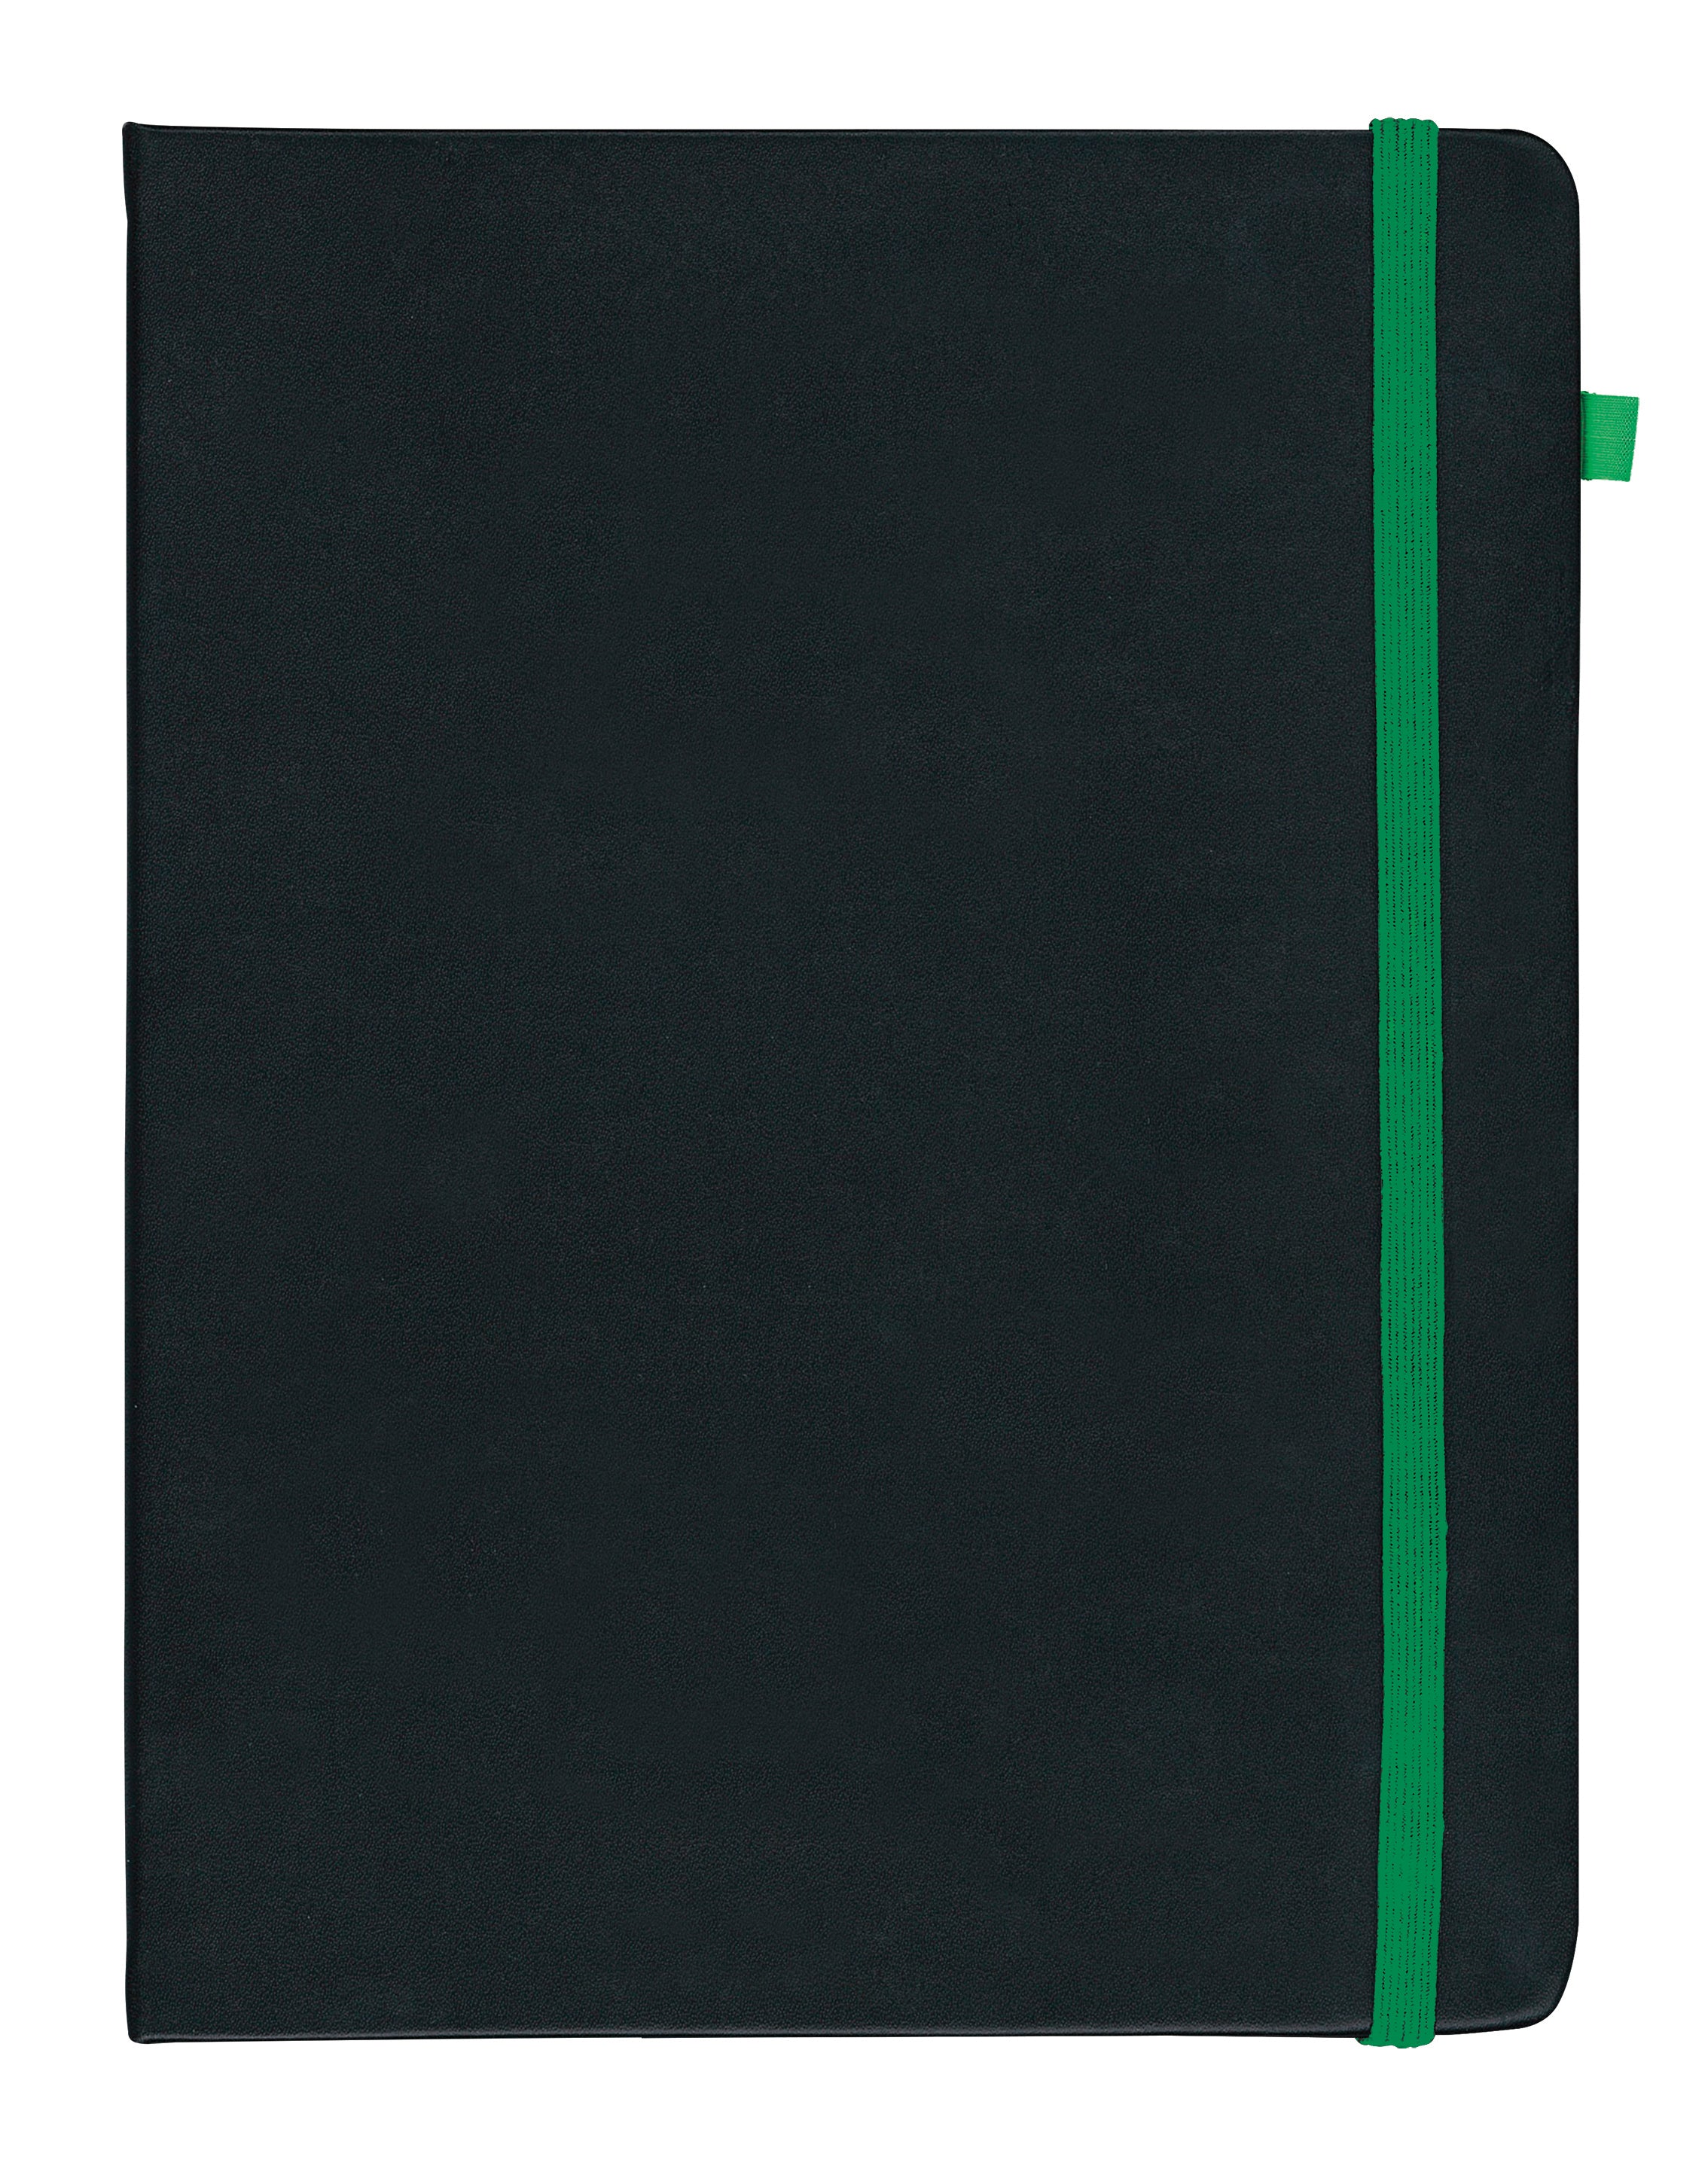 Vauxhall Contrast Notebook - Quarto Ruled - Collins Debden